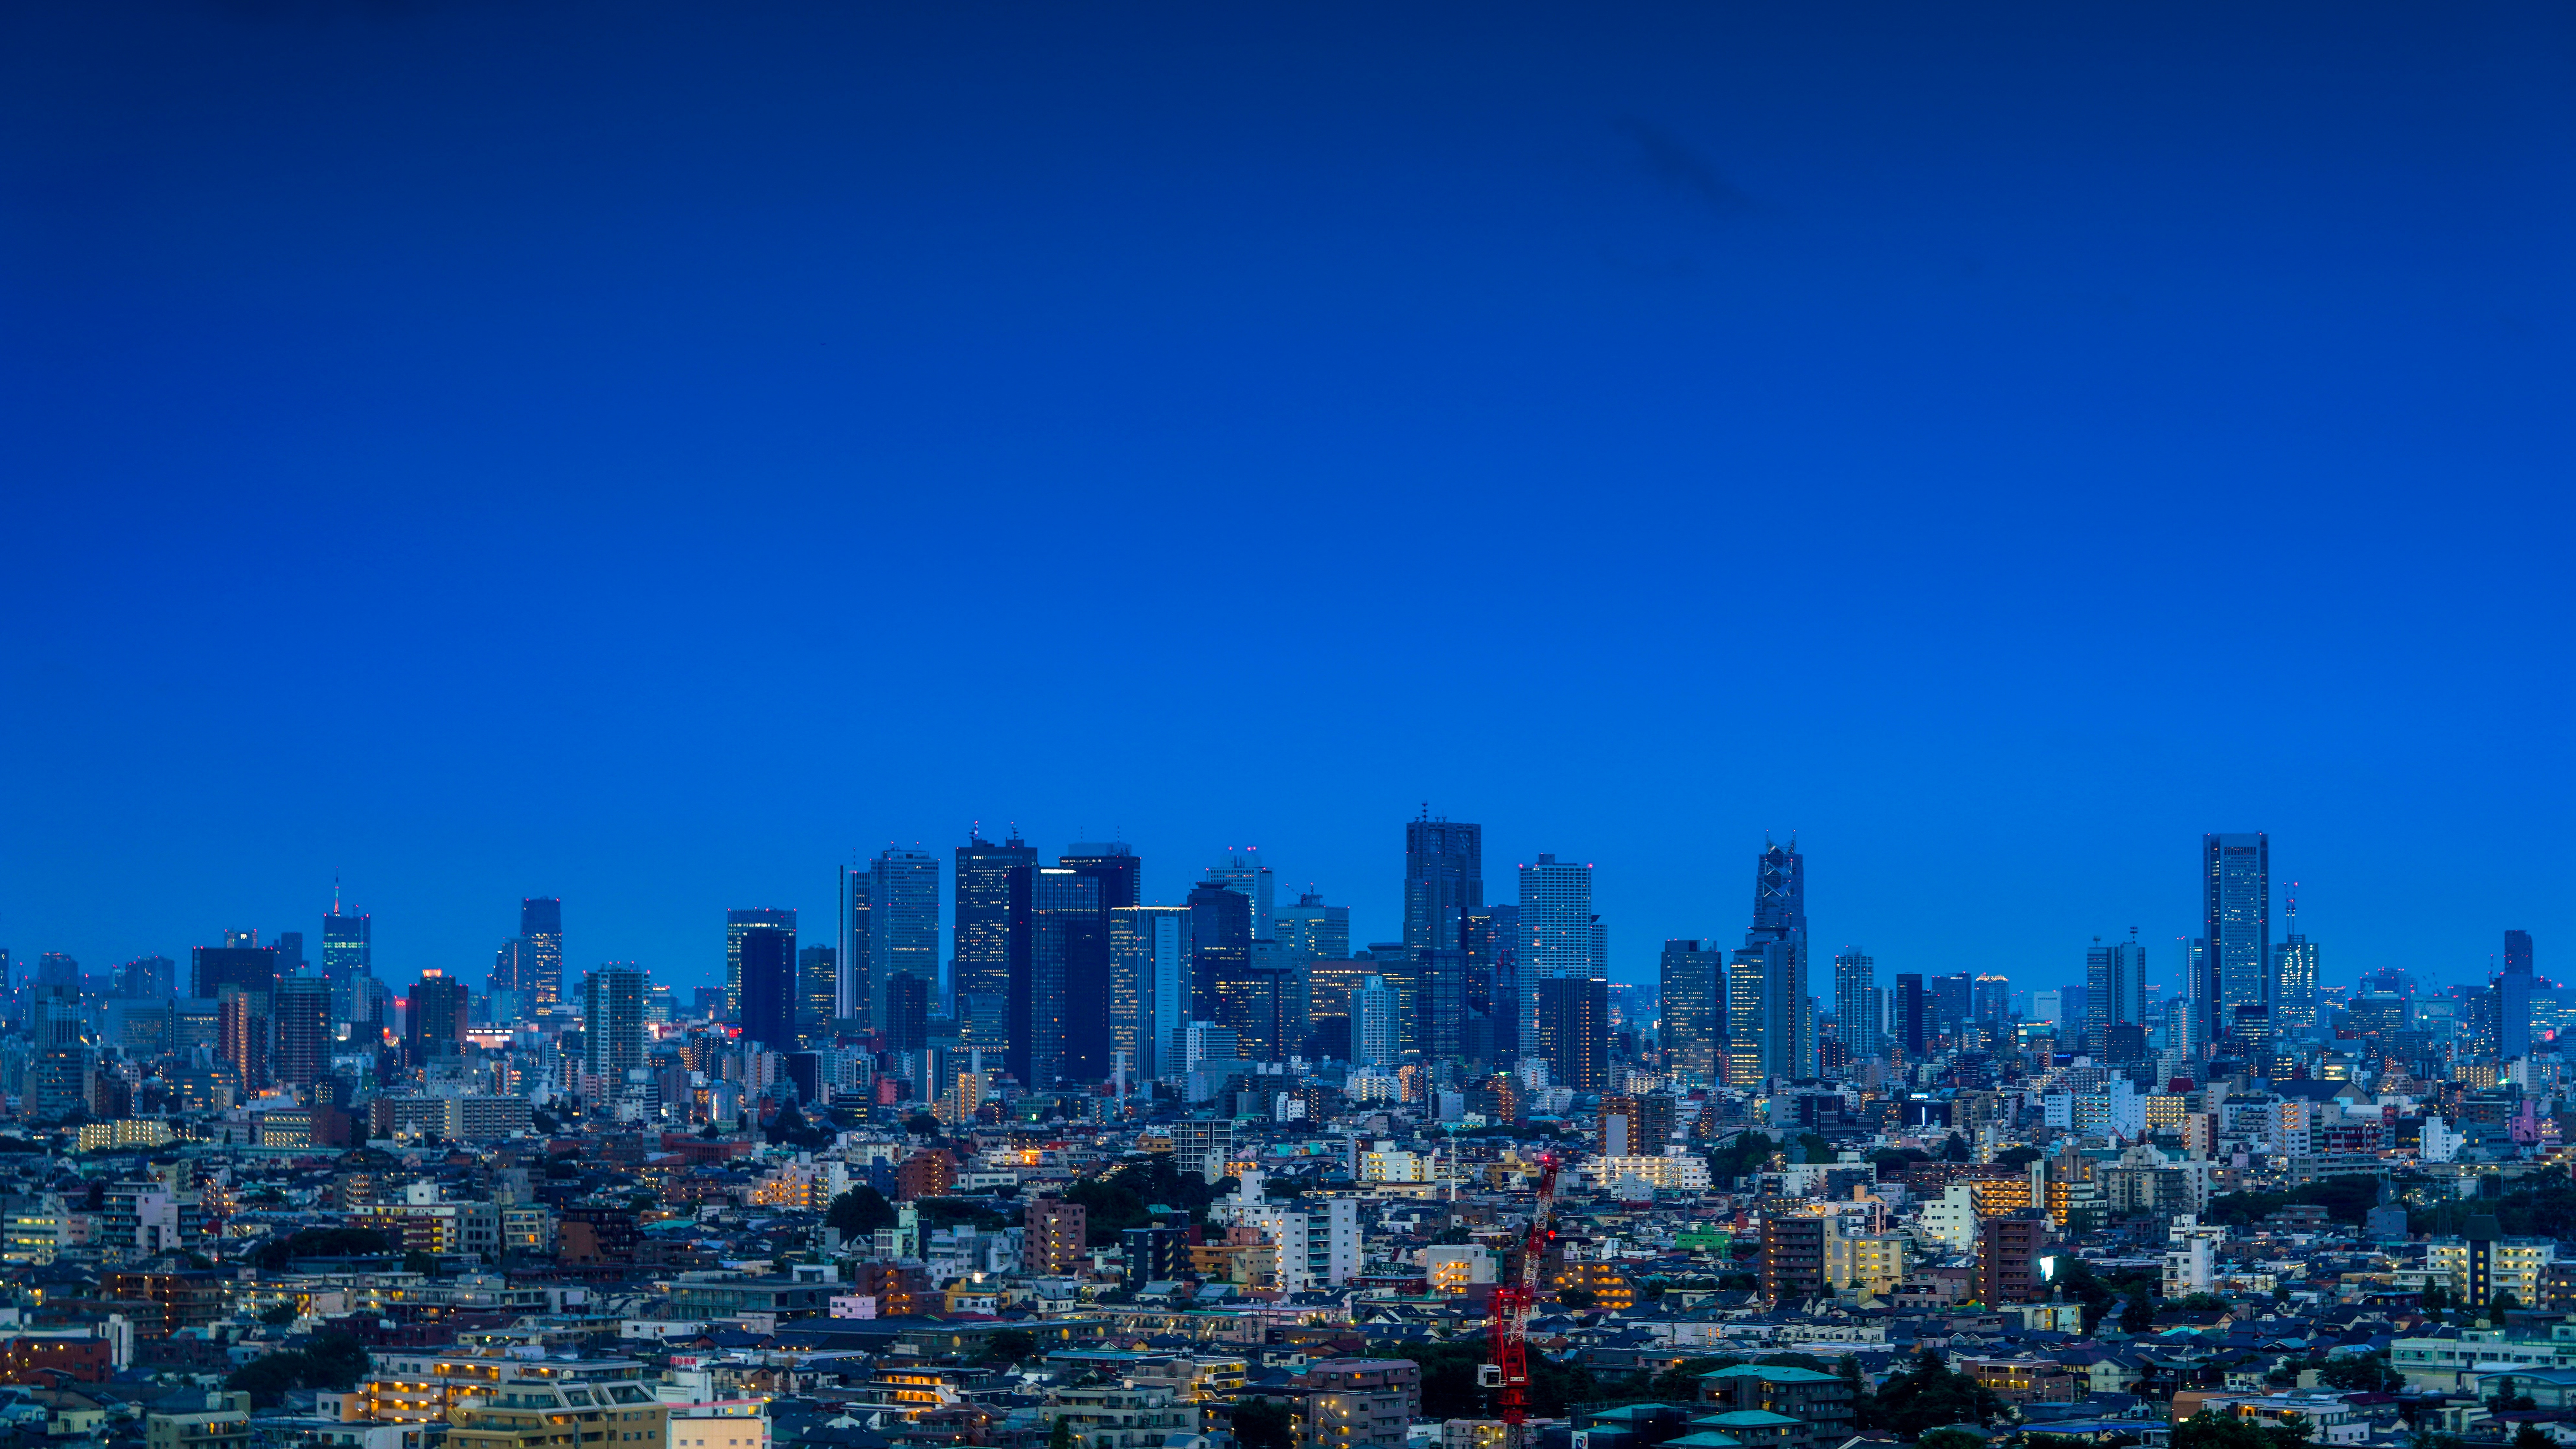 City With High Rise Buildings Under Blue Sky During Daytime. Wallpaper in 7680x4320 Resolution